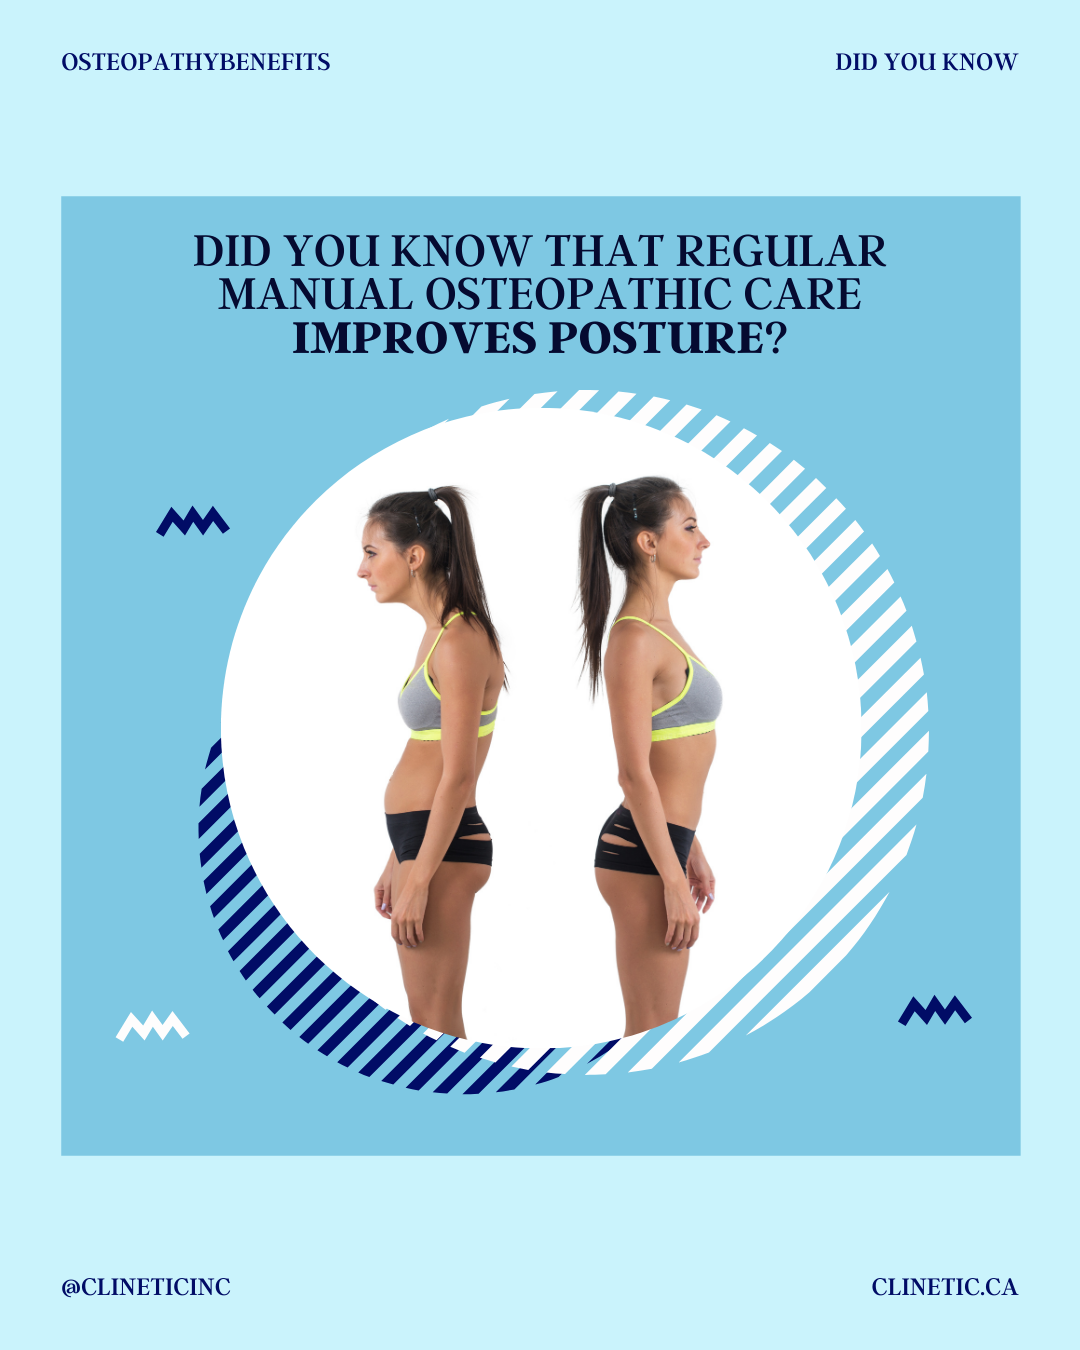 Did you know that regular manual osteopathic care improves posture?